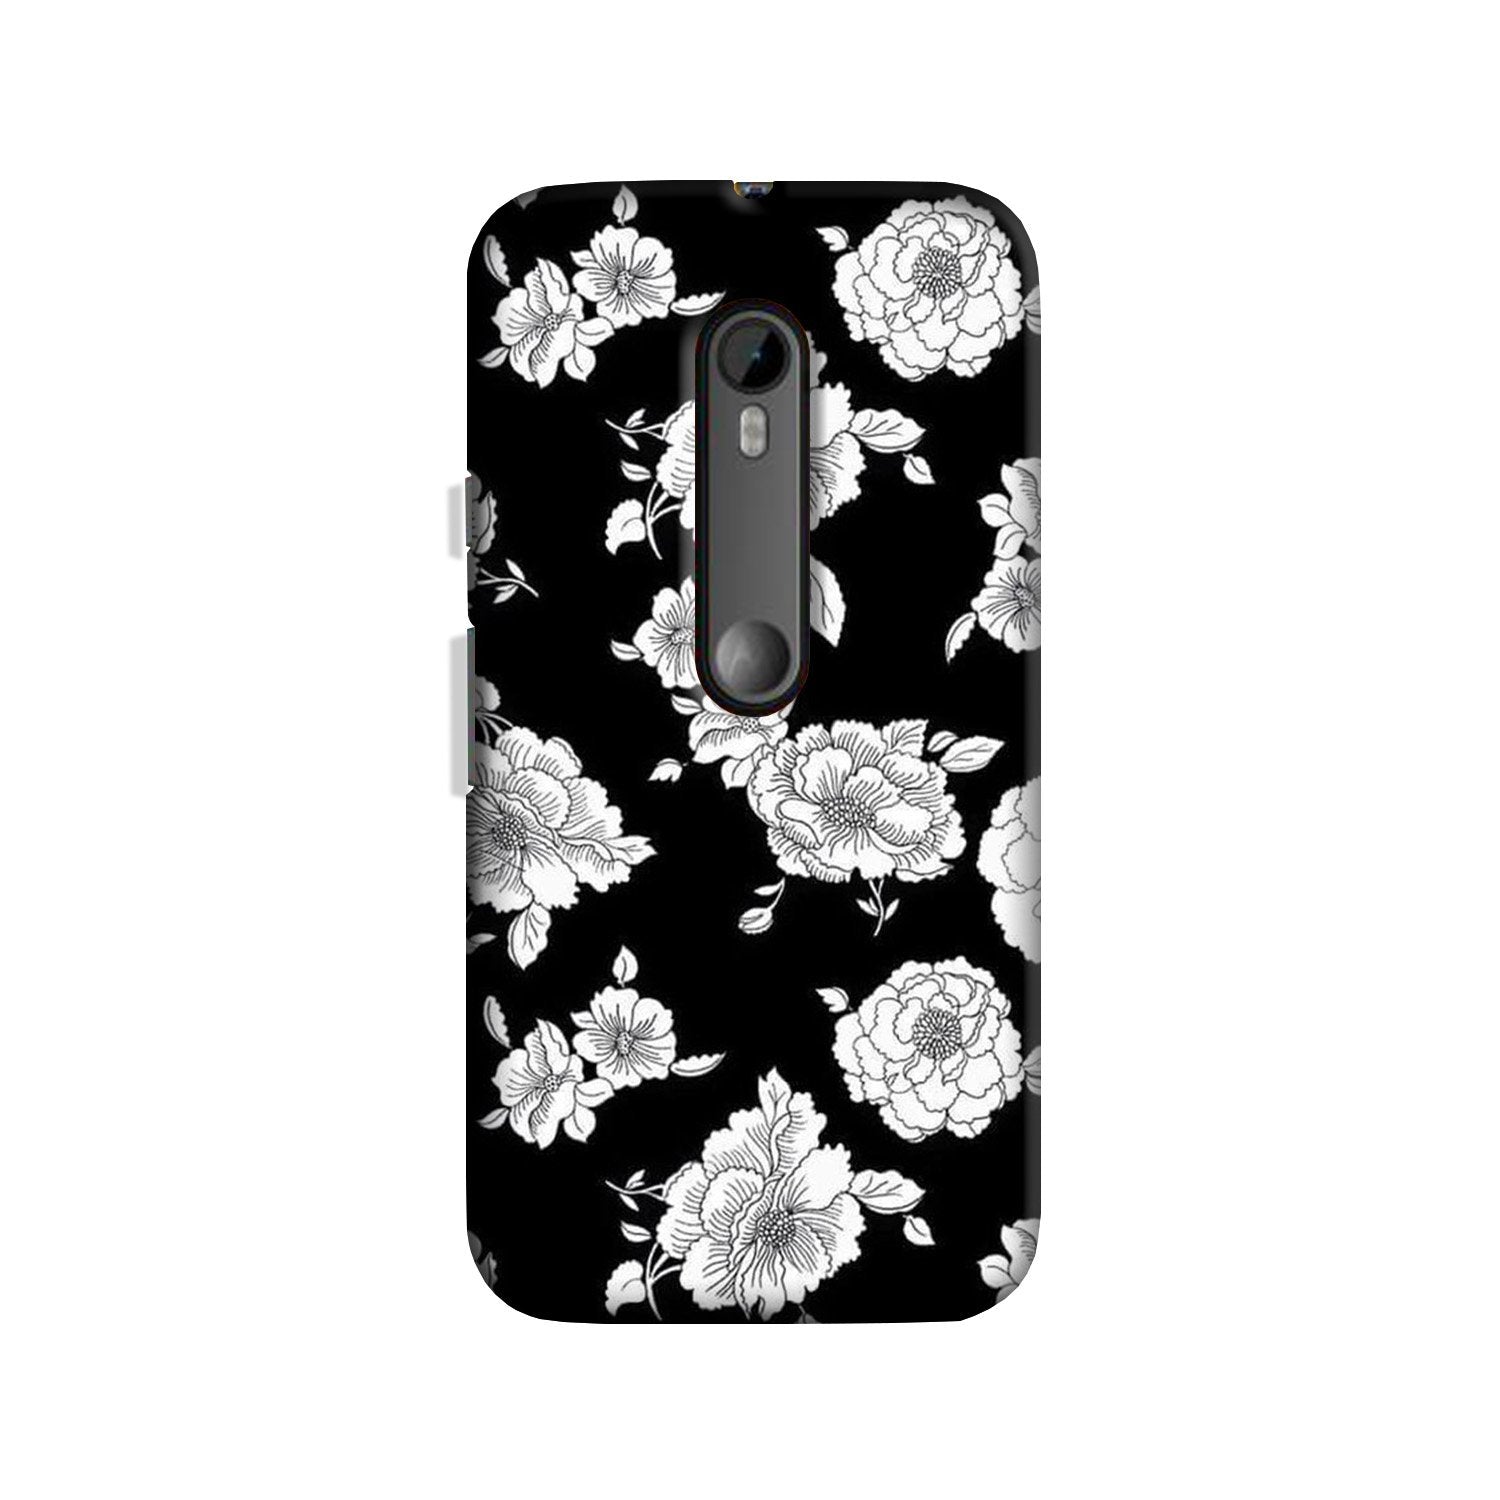 White flowers Black Background Case for Moto X Style